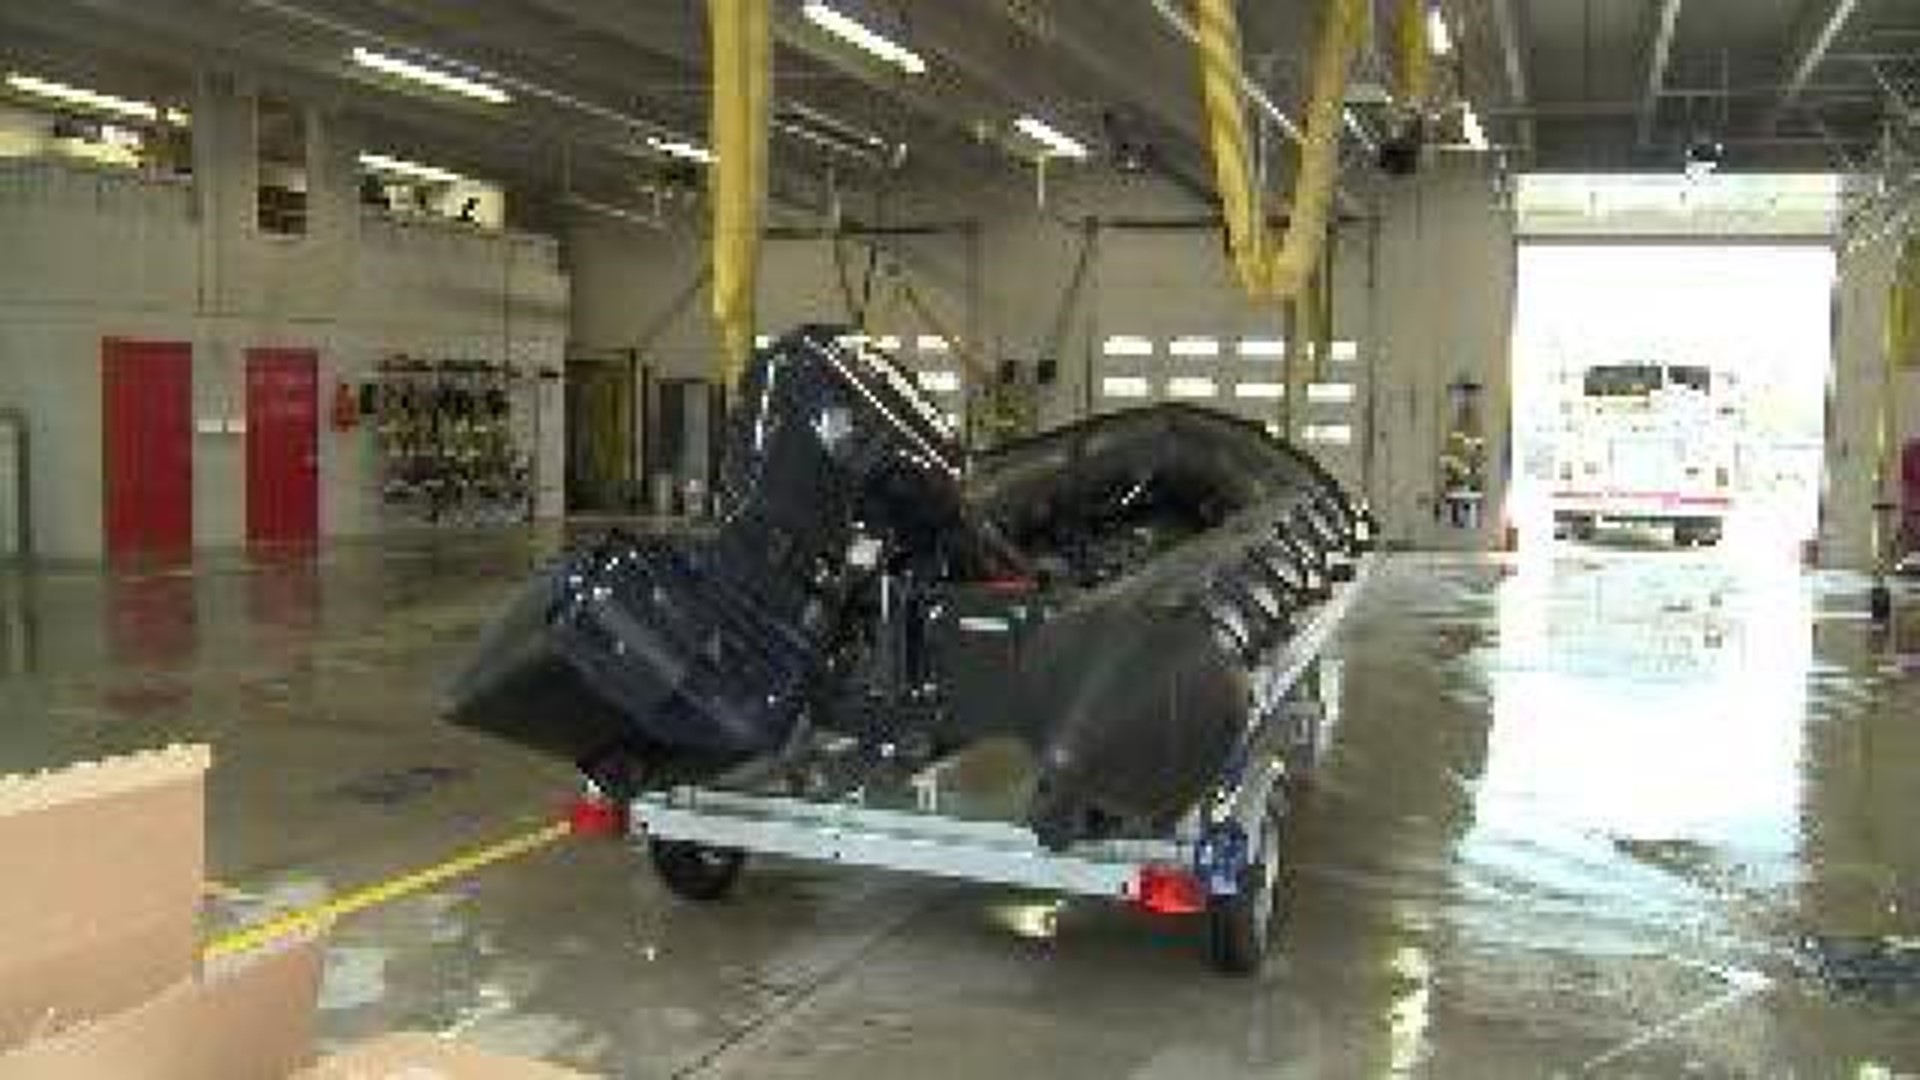 New Rescue Raft Added to Ft. Smith Fire Dept.